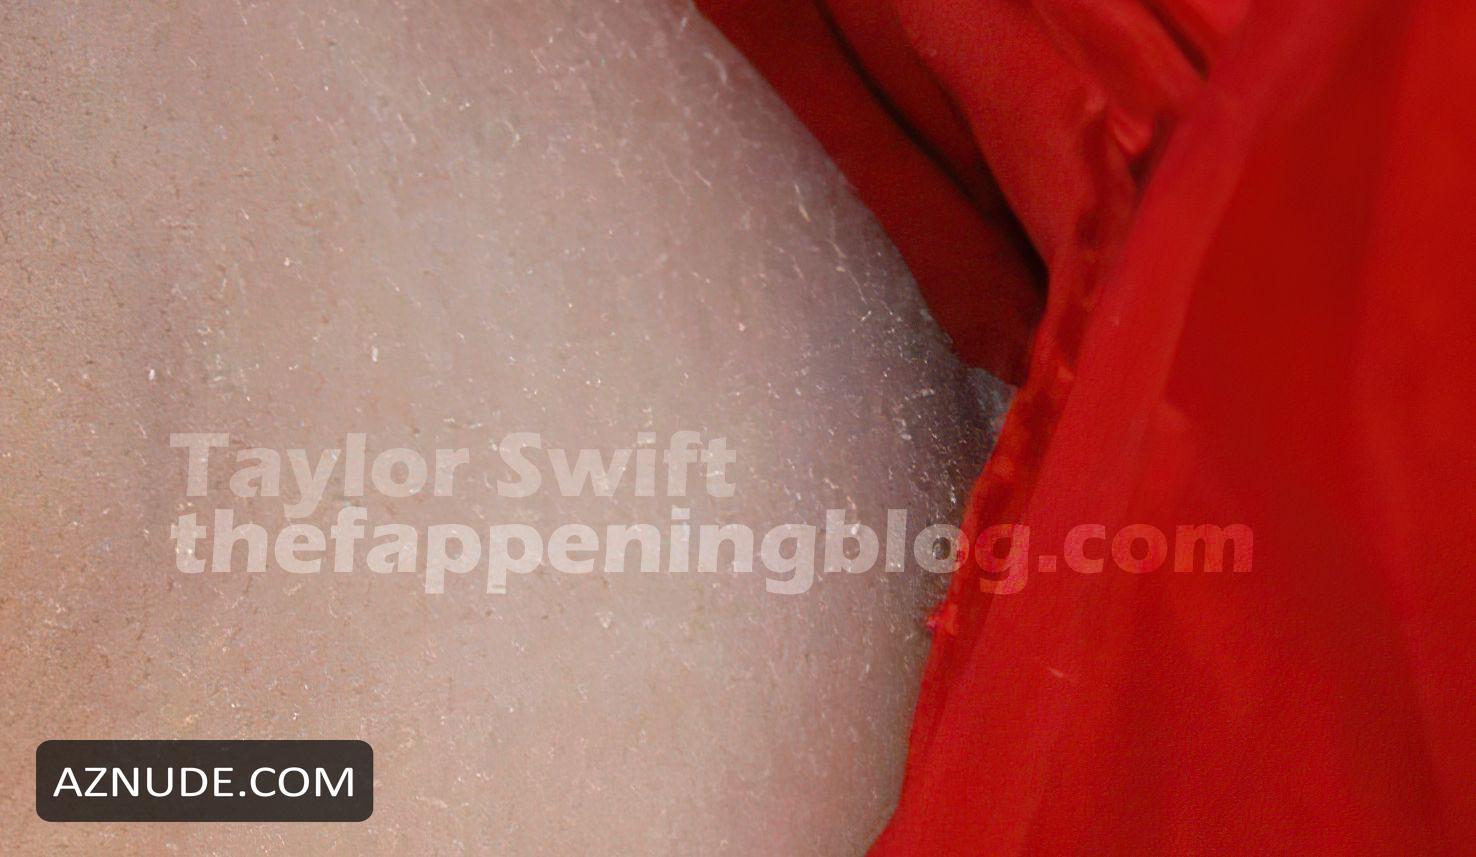 Taylor Swift Nipple Slip From The Academy Of Country Music